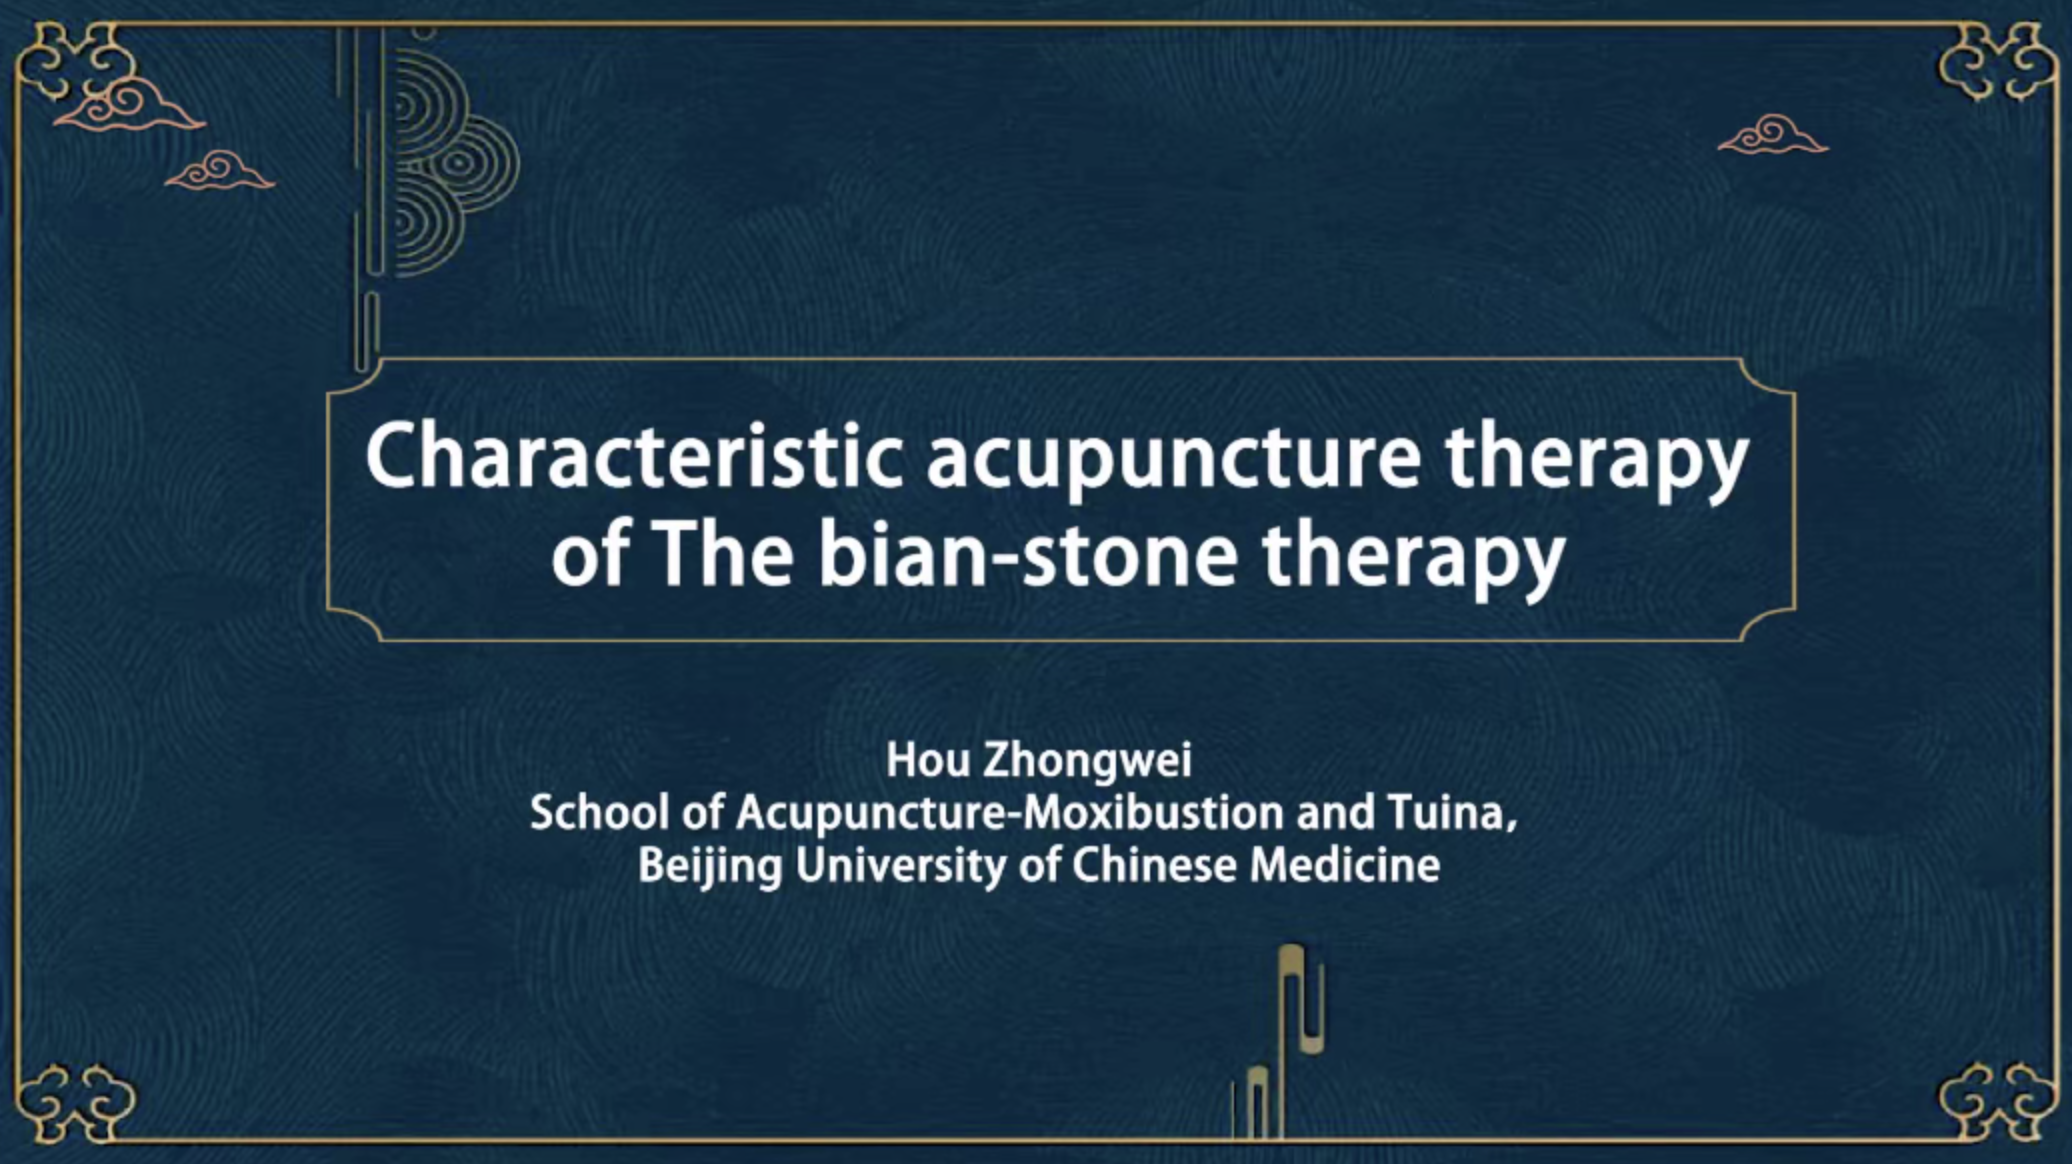 Hou zhongwei+Characteristic acupuncture therapy of The bian-stone therapy